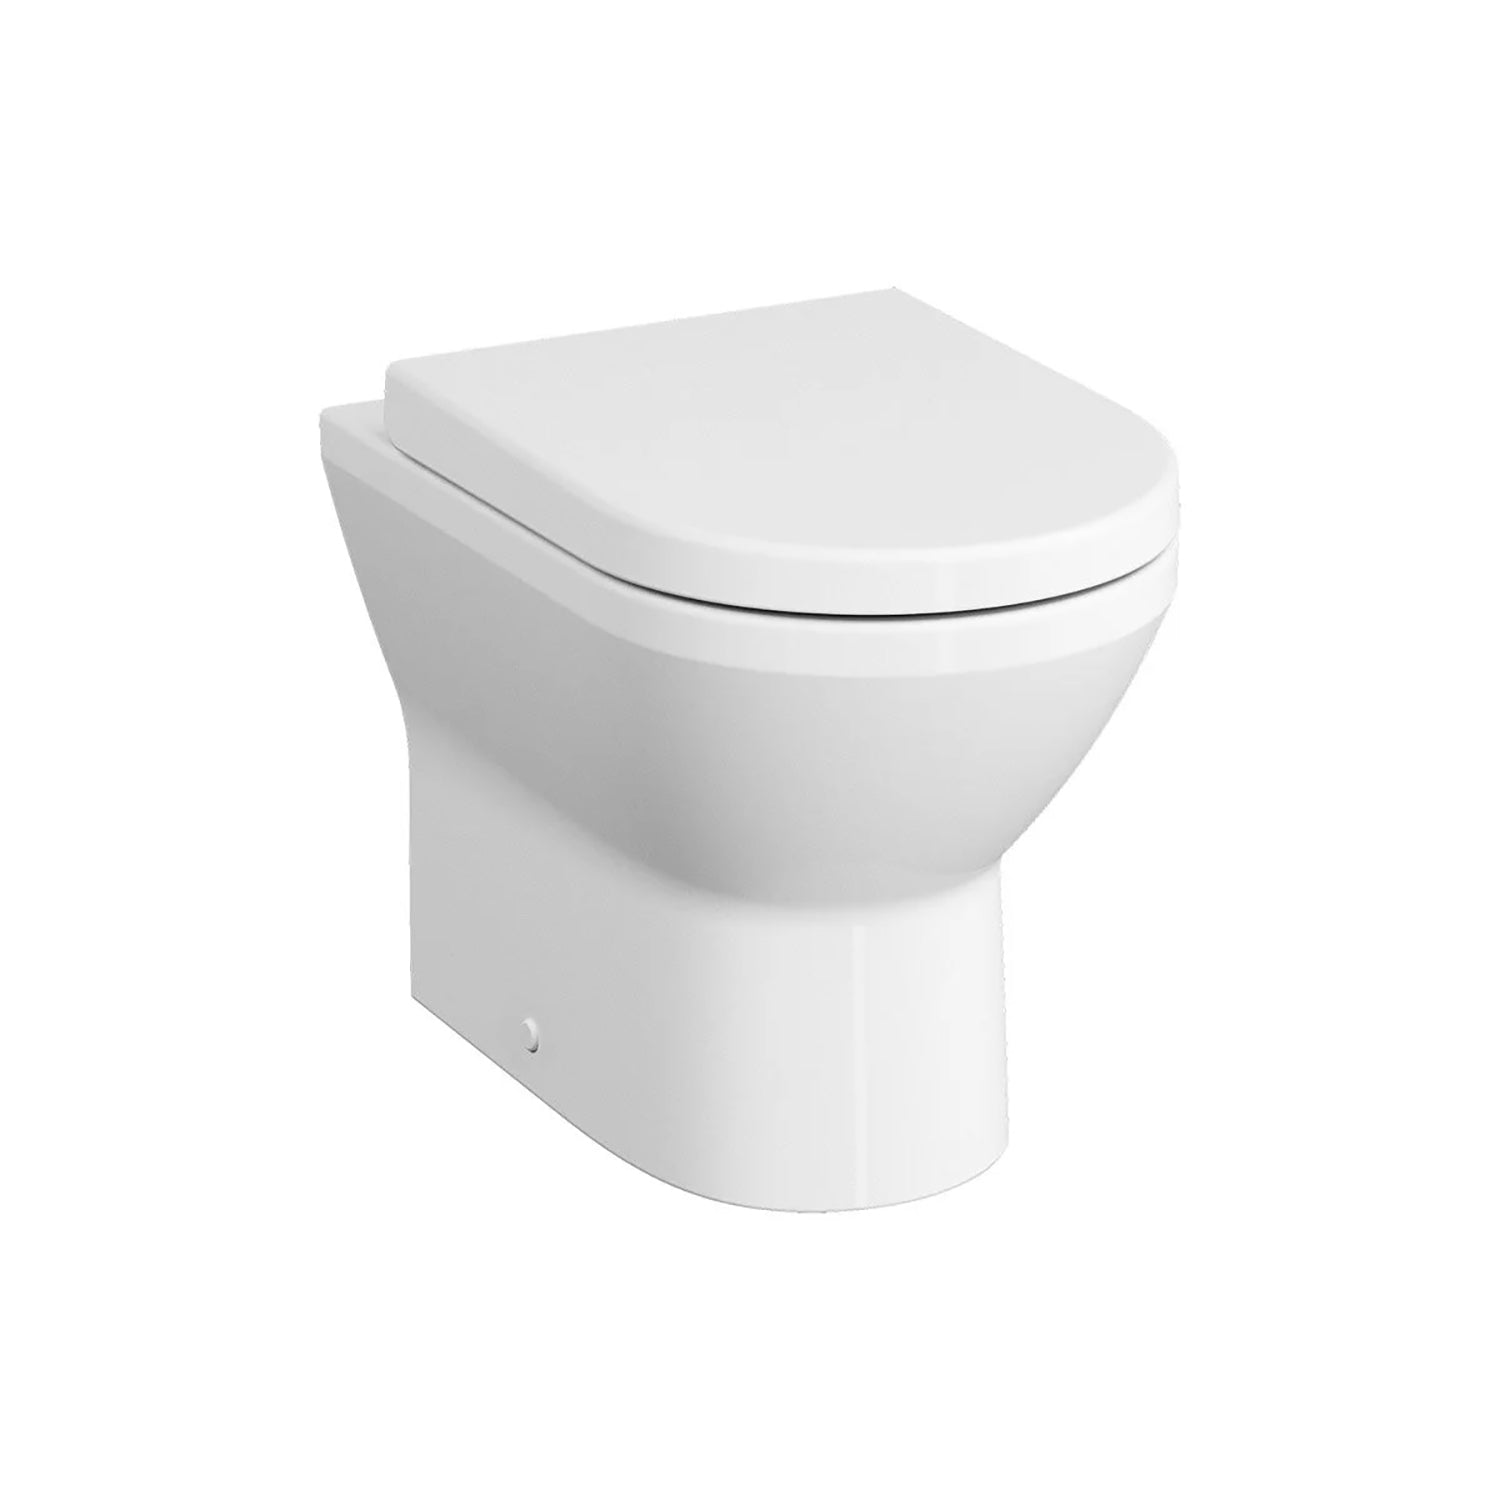 Vesta back to wall toilet in a white finish, 400mm with seat included on a white background.